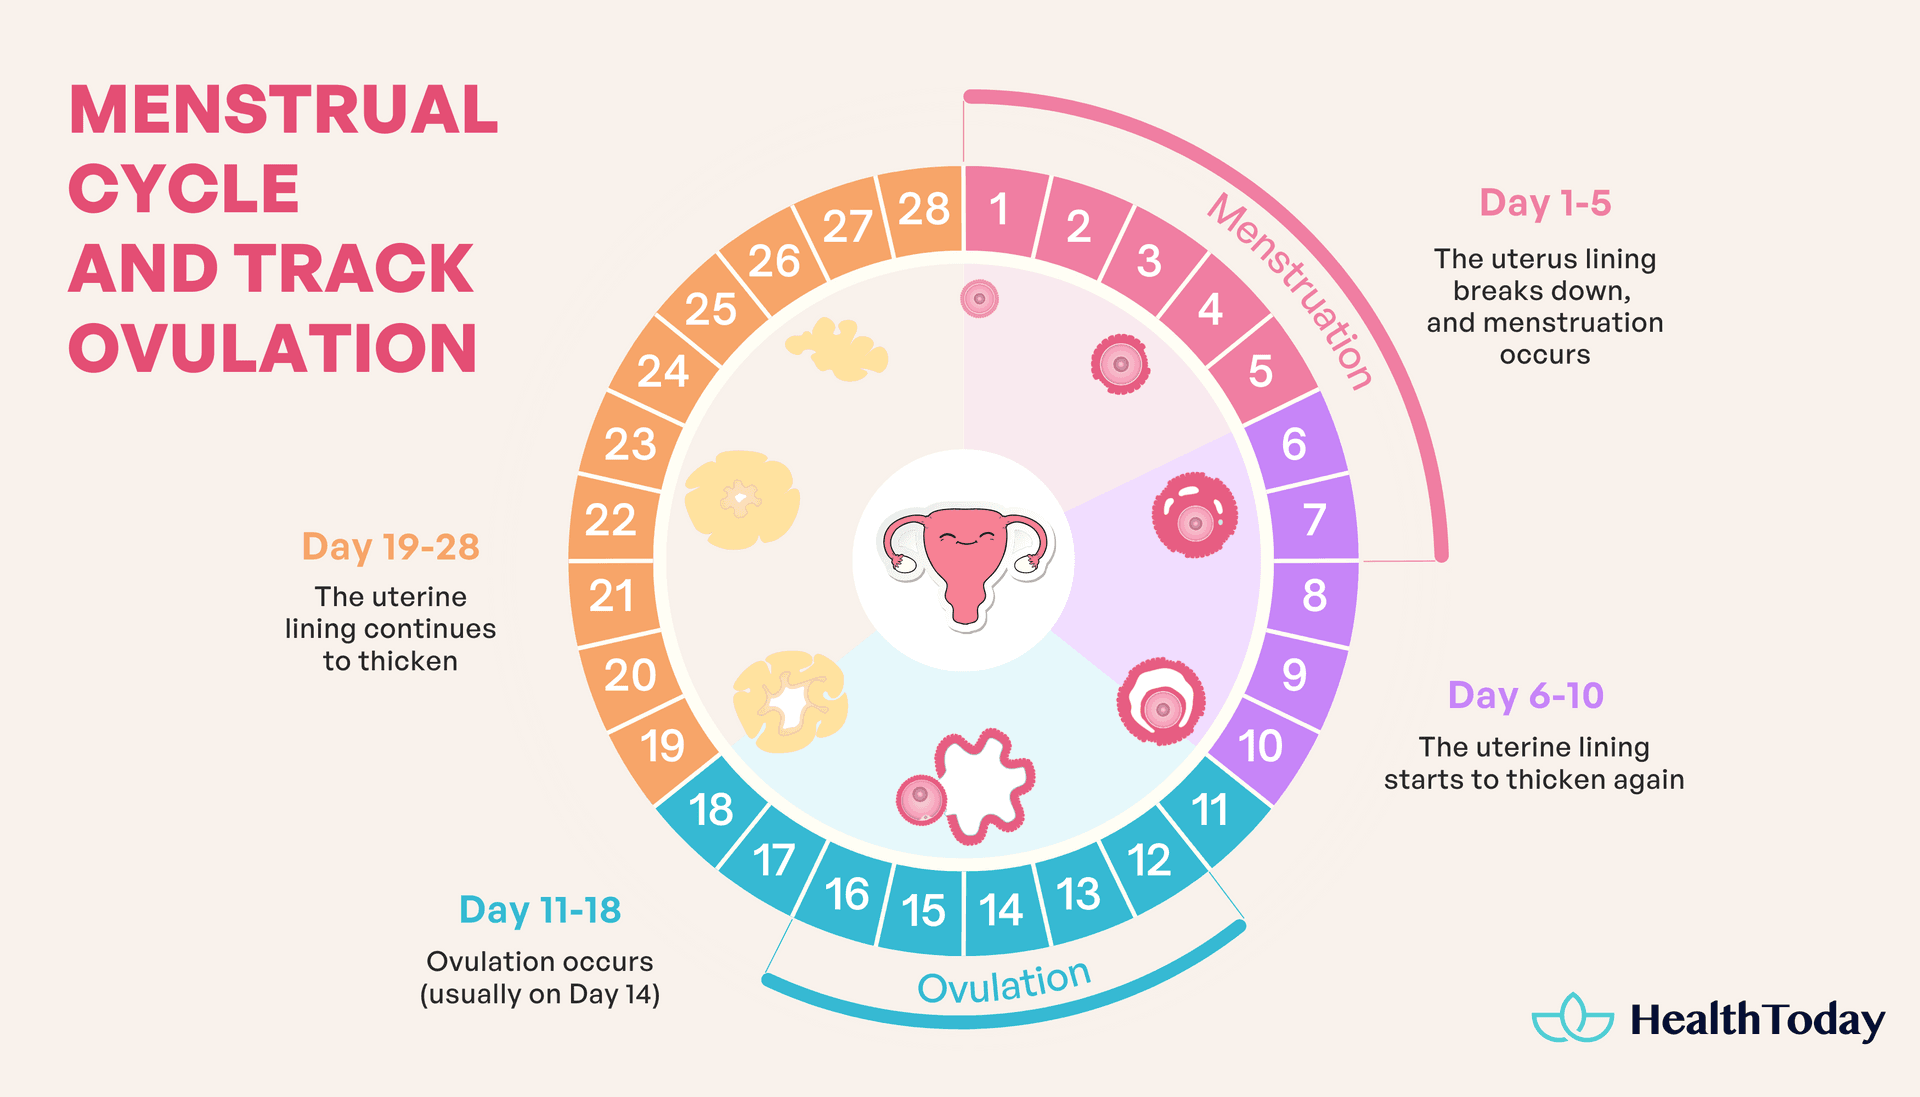 Menstrual cycle and track ovulation